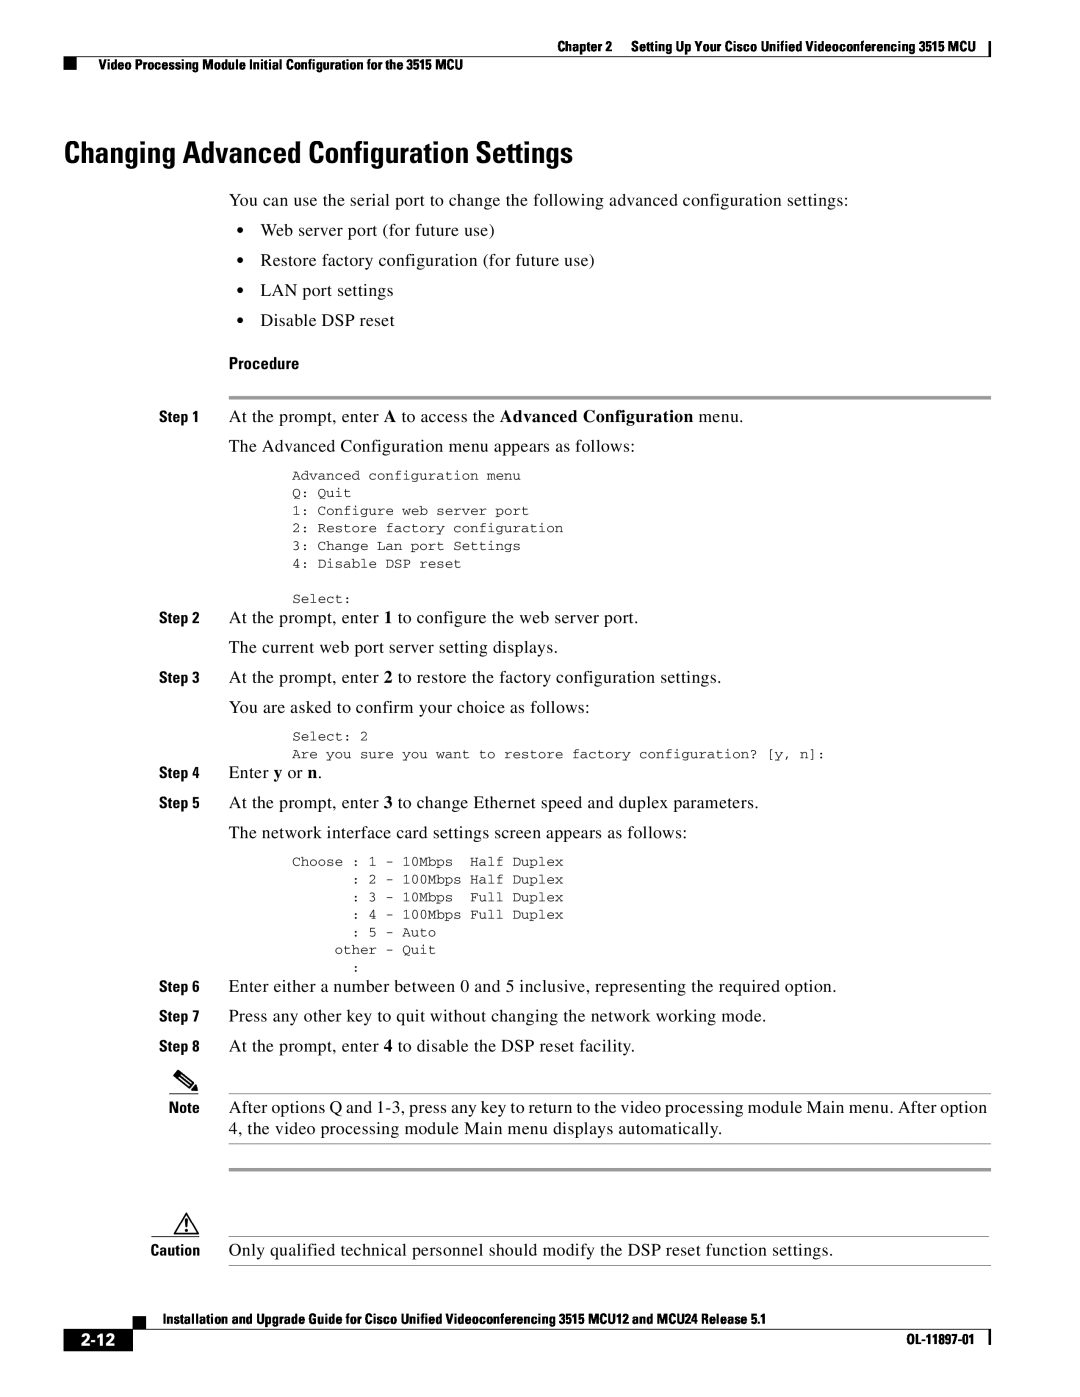 Cisco Systems MCU24 manual Changing Advanced Configuration Settings, 2-12 